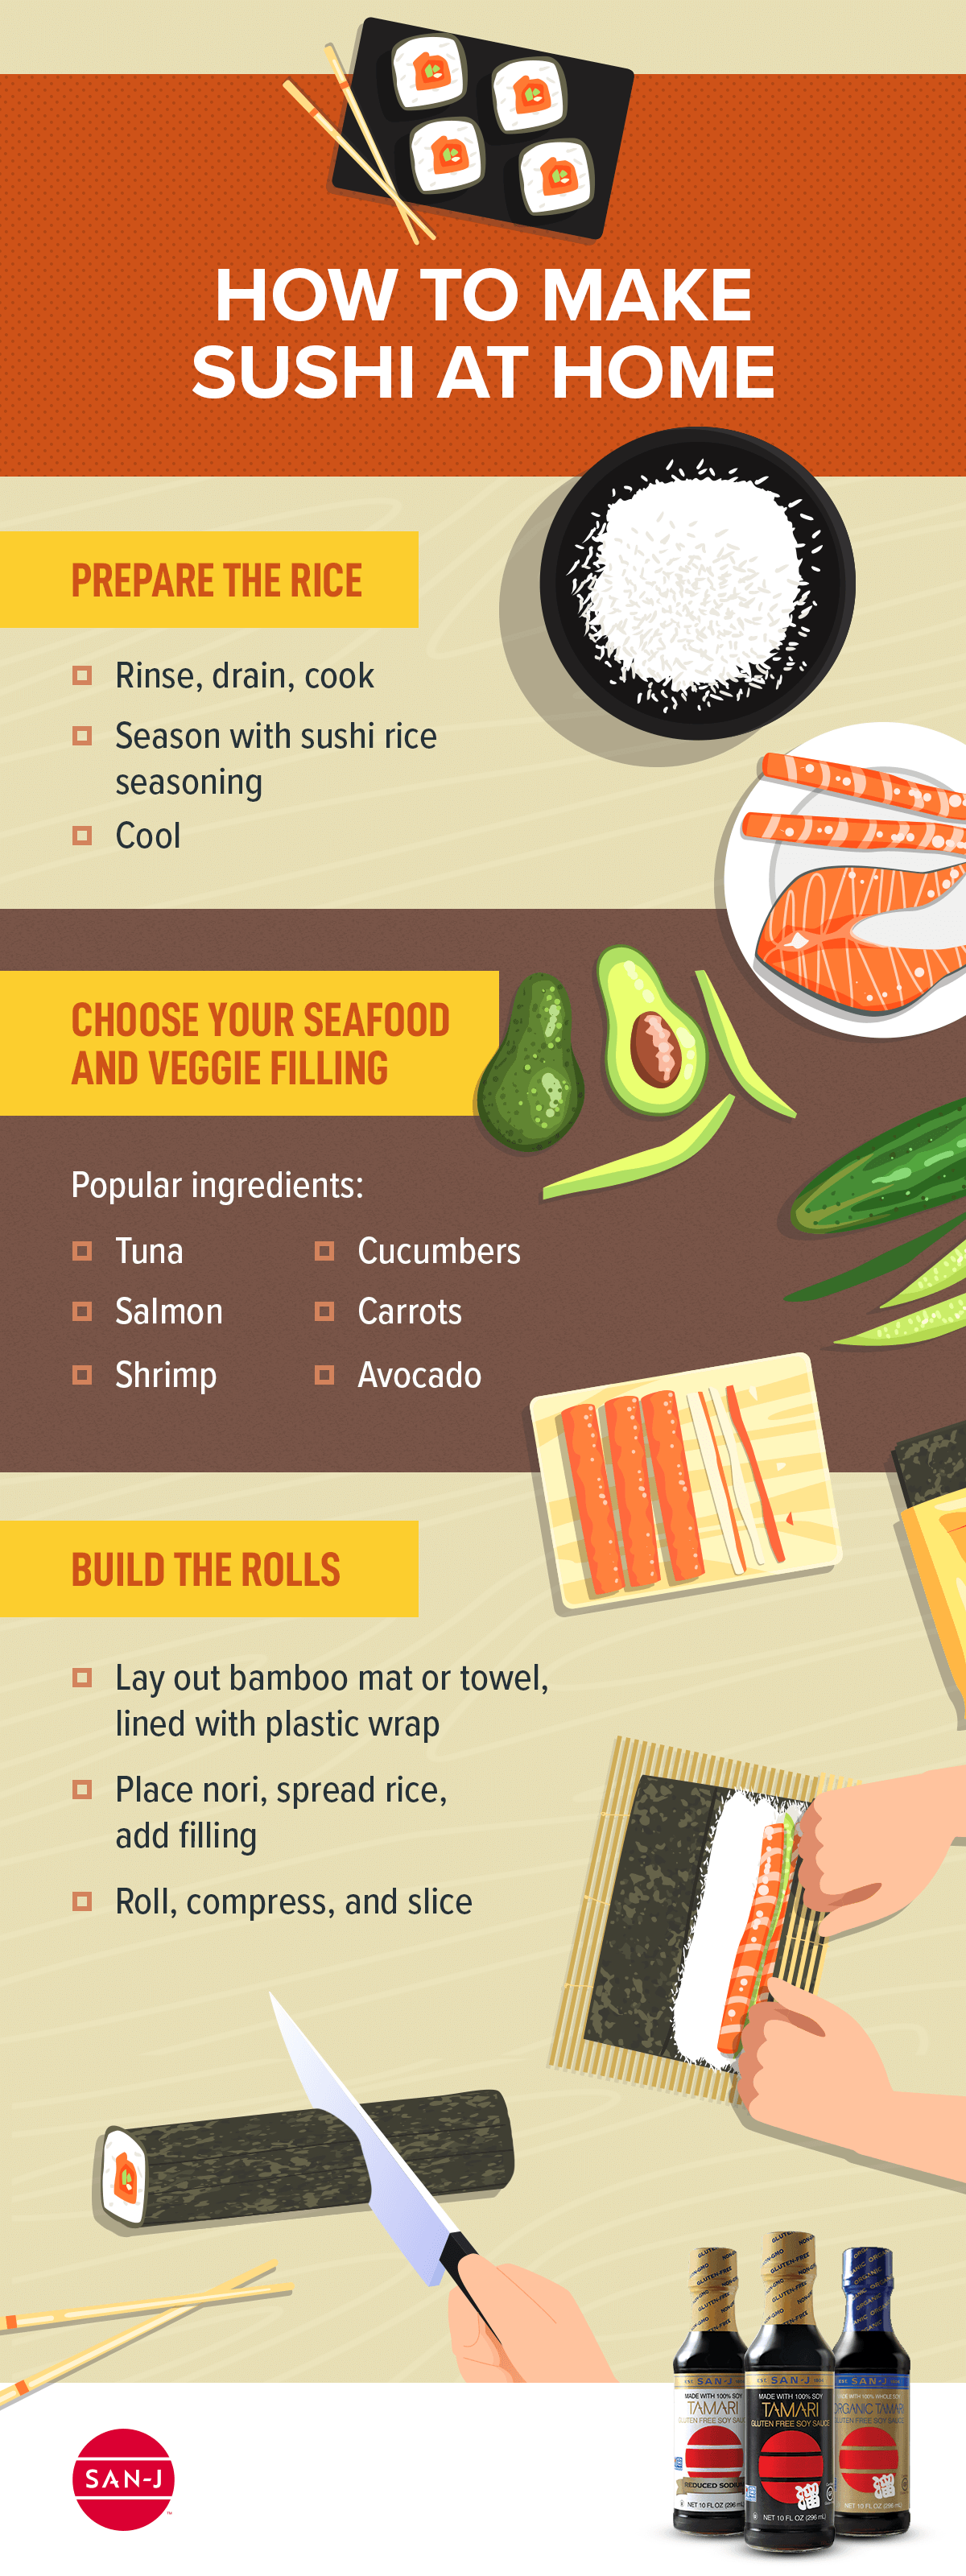 https://san-j.com/wp-content/uploads/2021/01/How-to-Make-Sushi-At-Home-R02-2.png